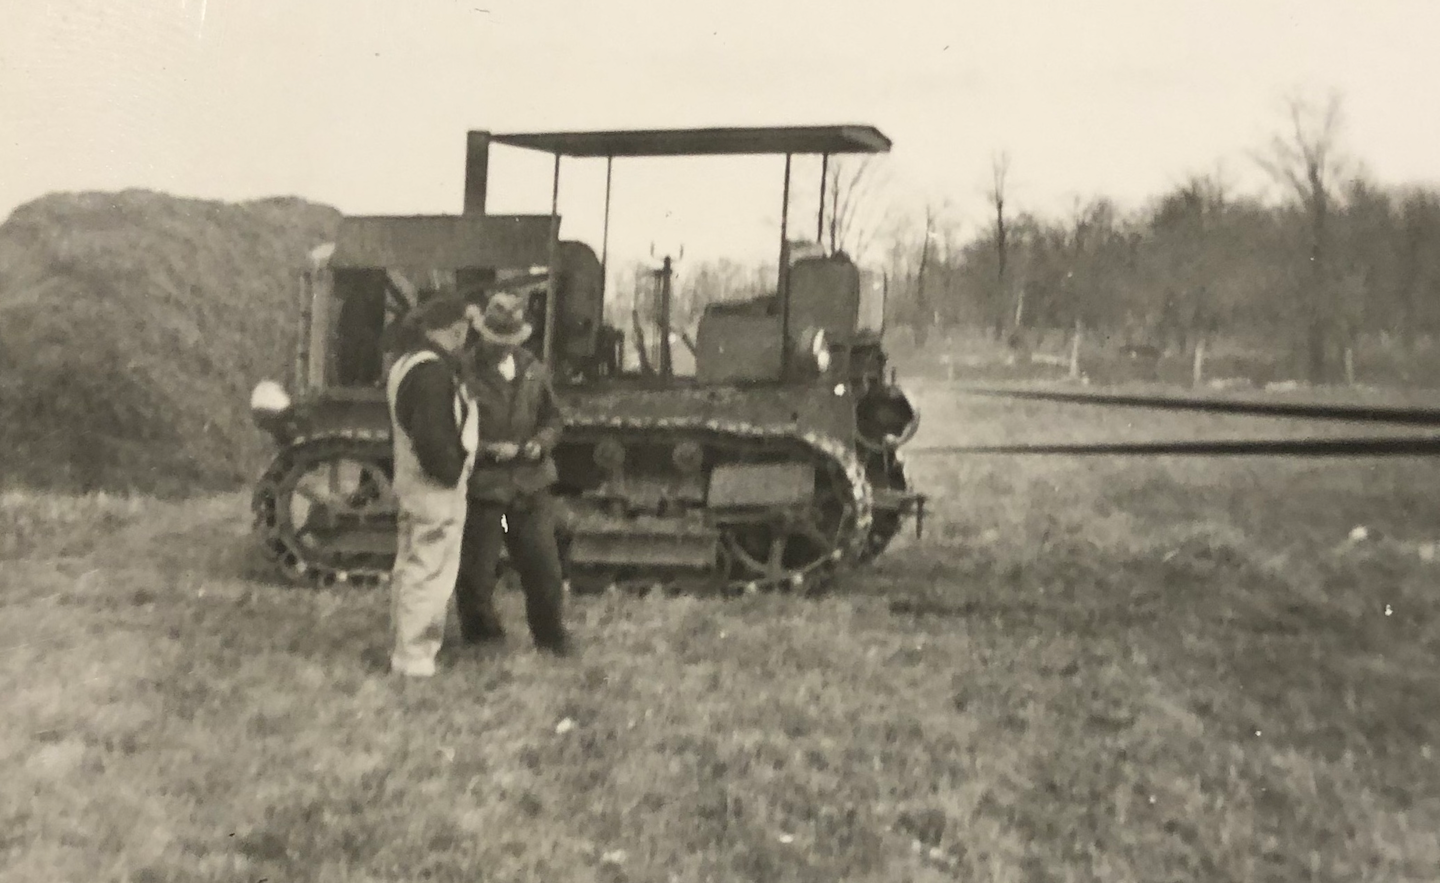 A Vouk family photo of the Holt Caterpillar 10-Ton in the 1940s when it was used for threshing.